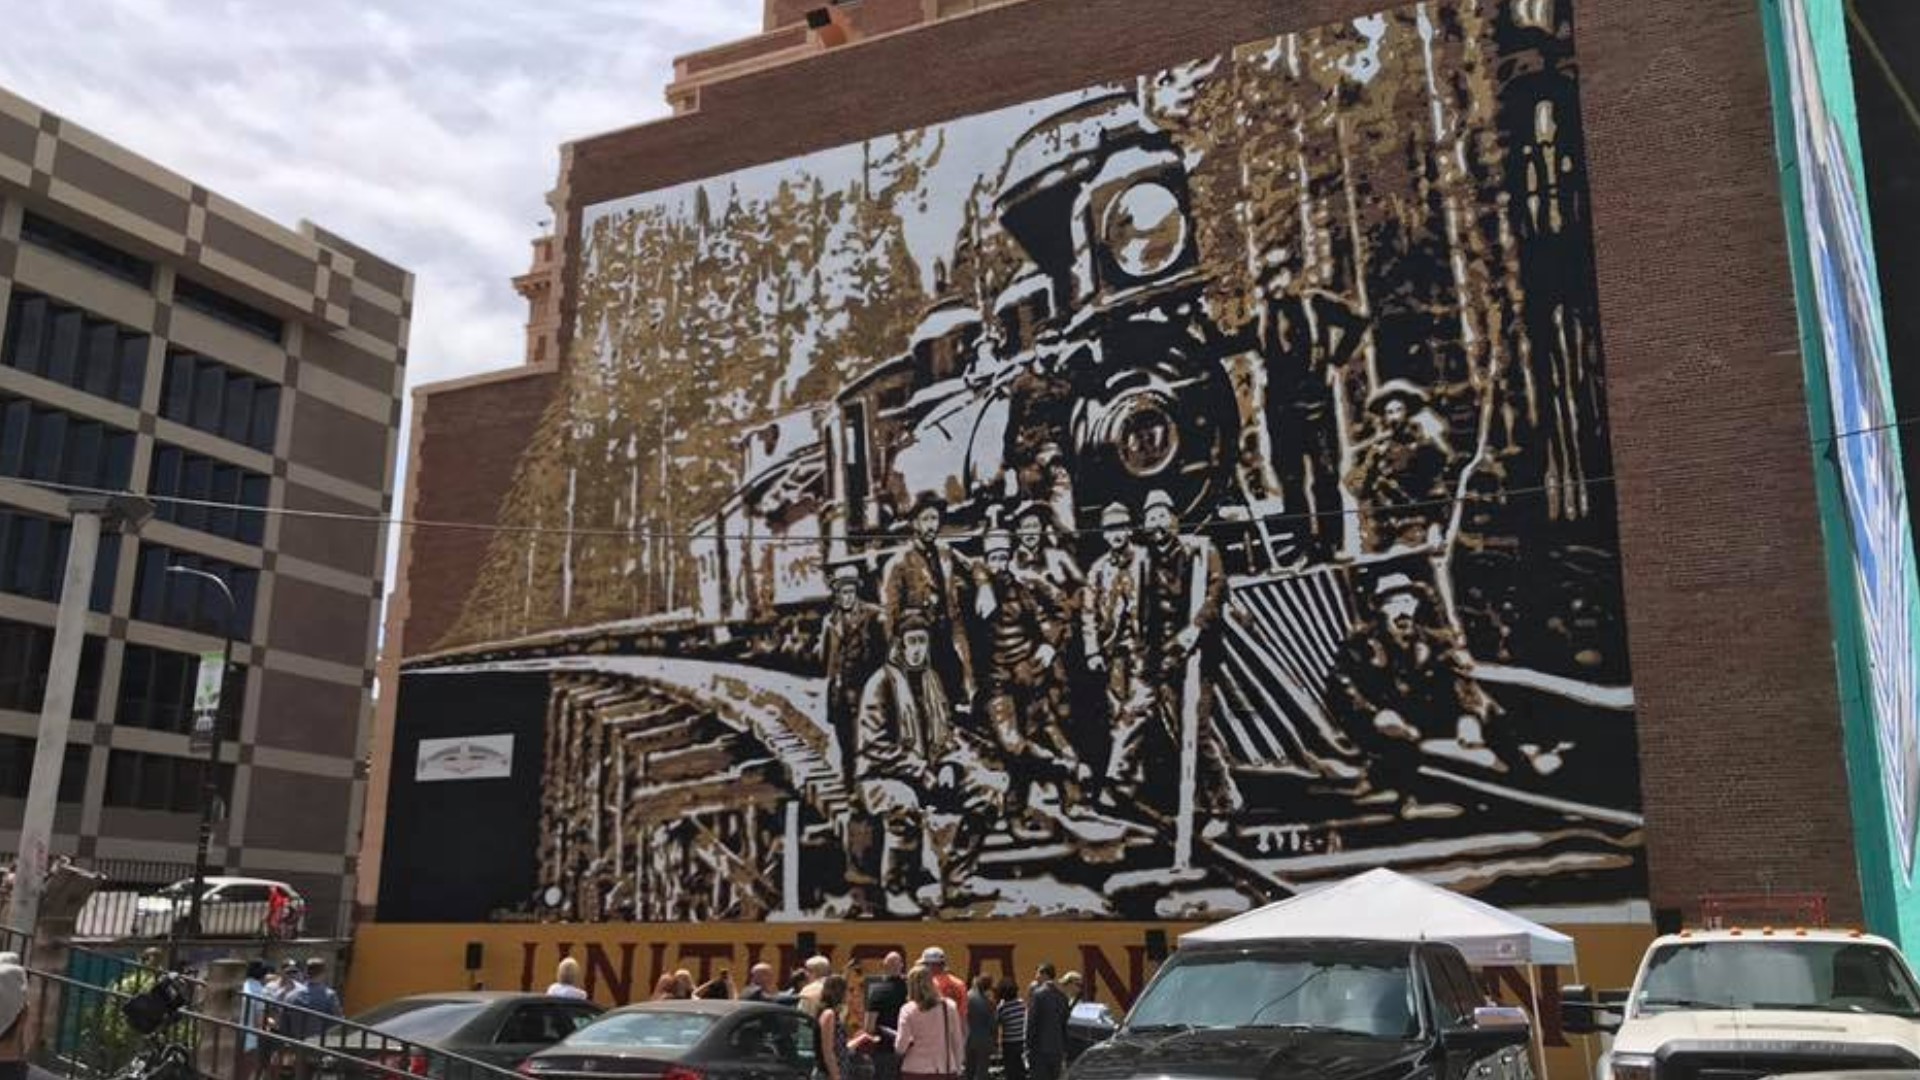 Sacramento has a new mural on the Elks Tower in downtown. Artist Maren Conrad says the mural aims to correct history by including images of Chinese immigrants who helped build the railroad.